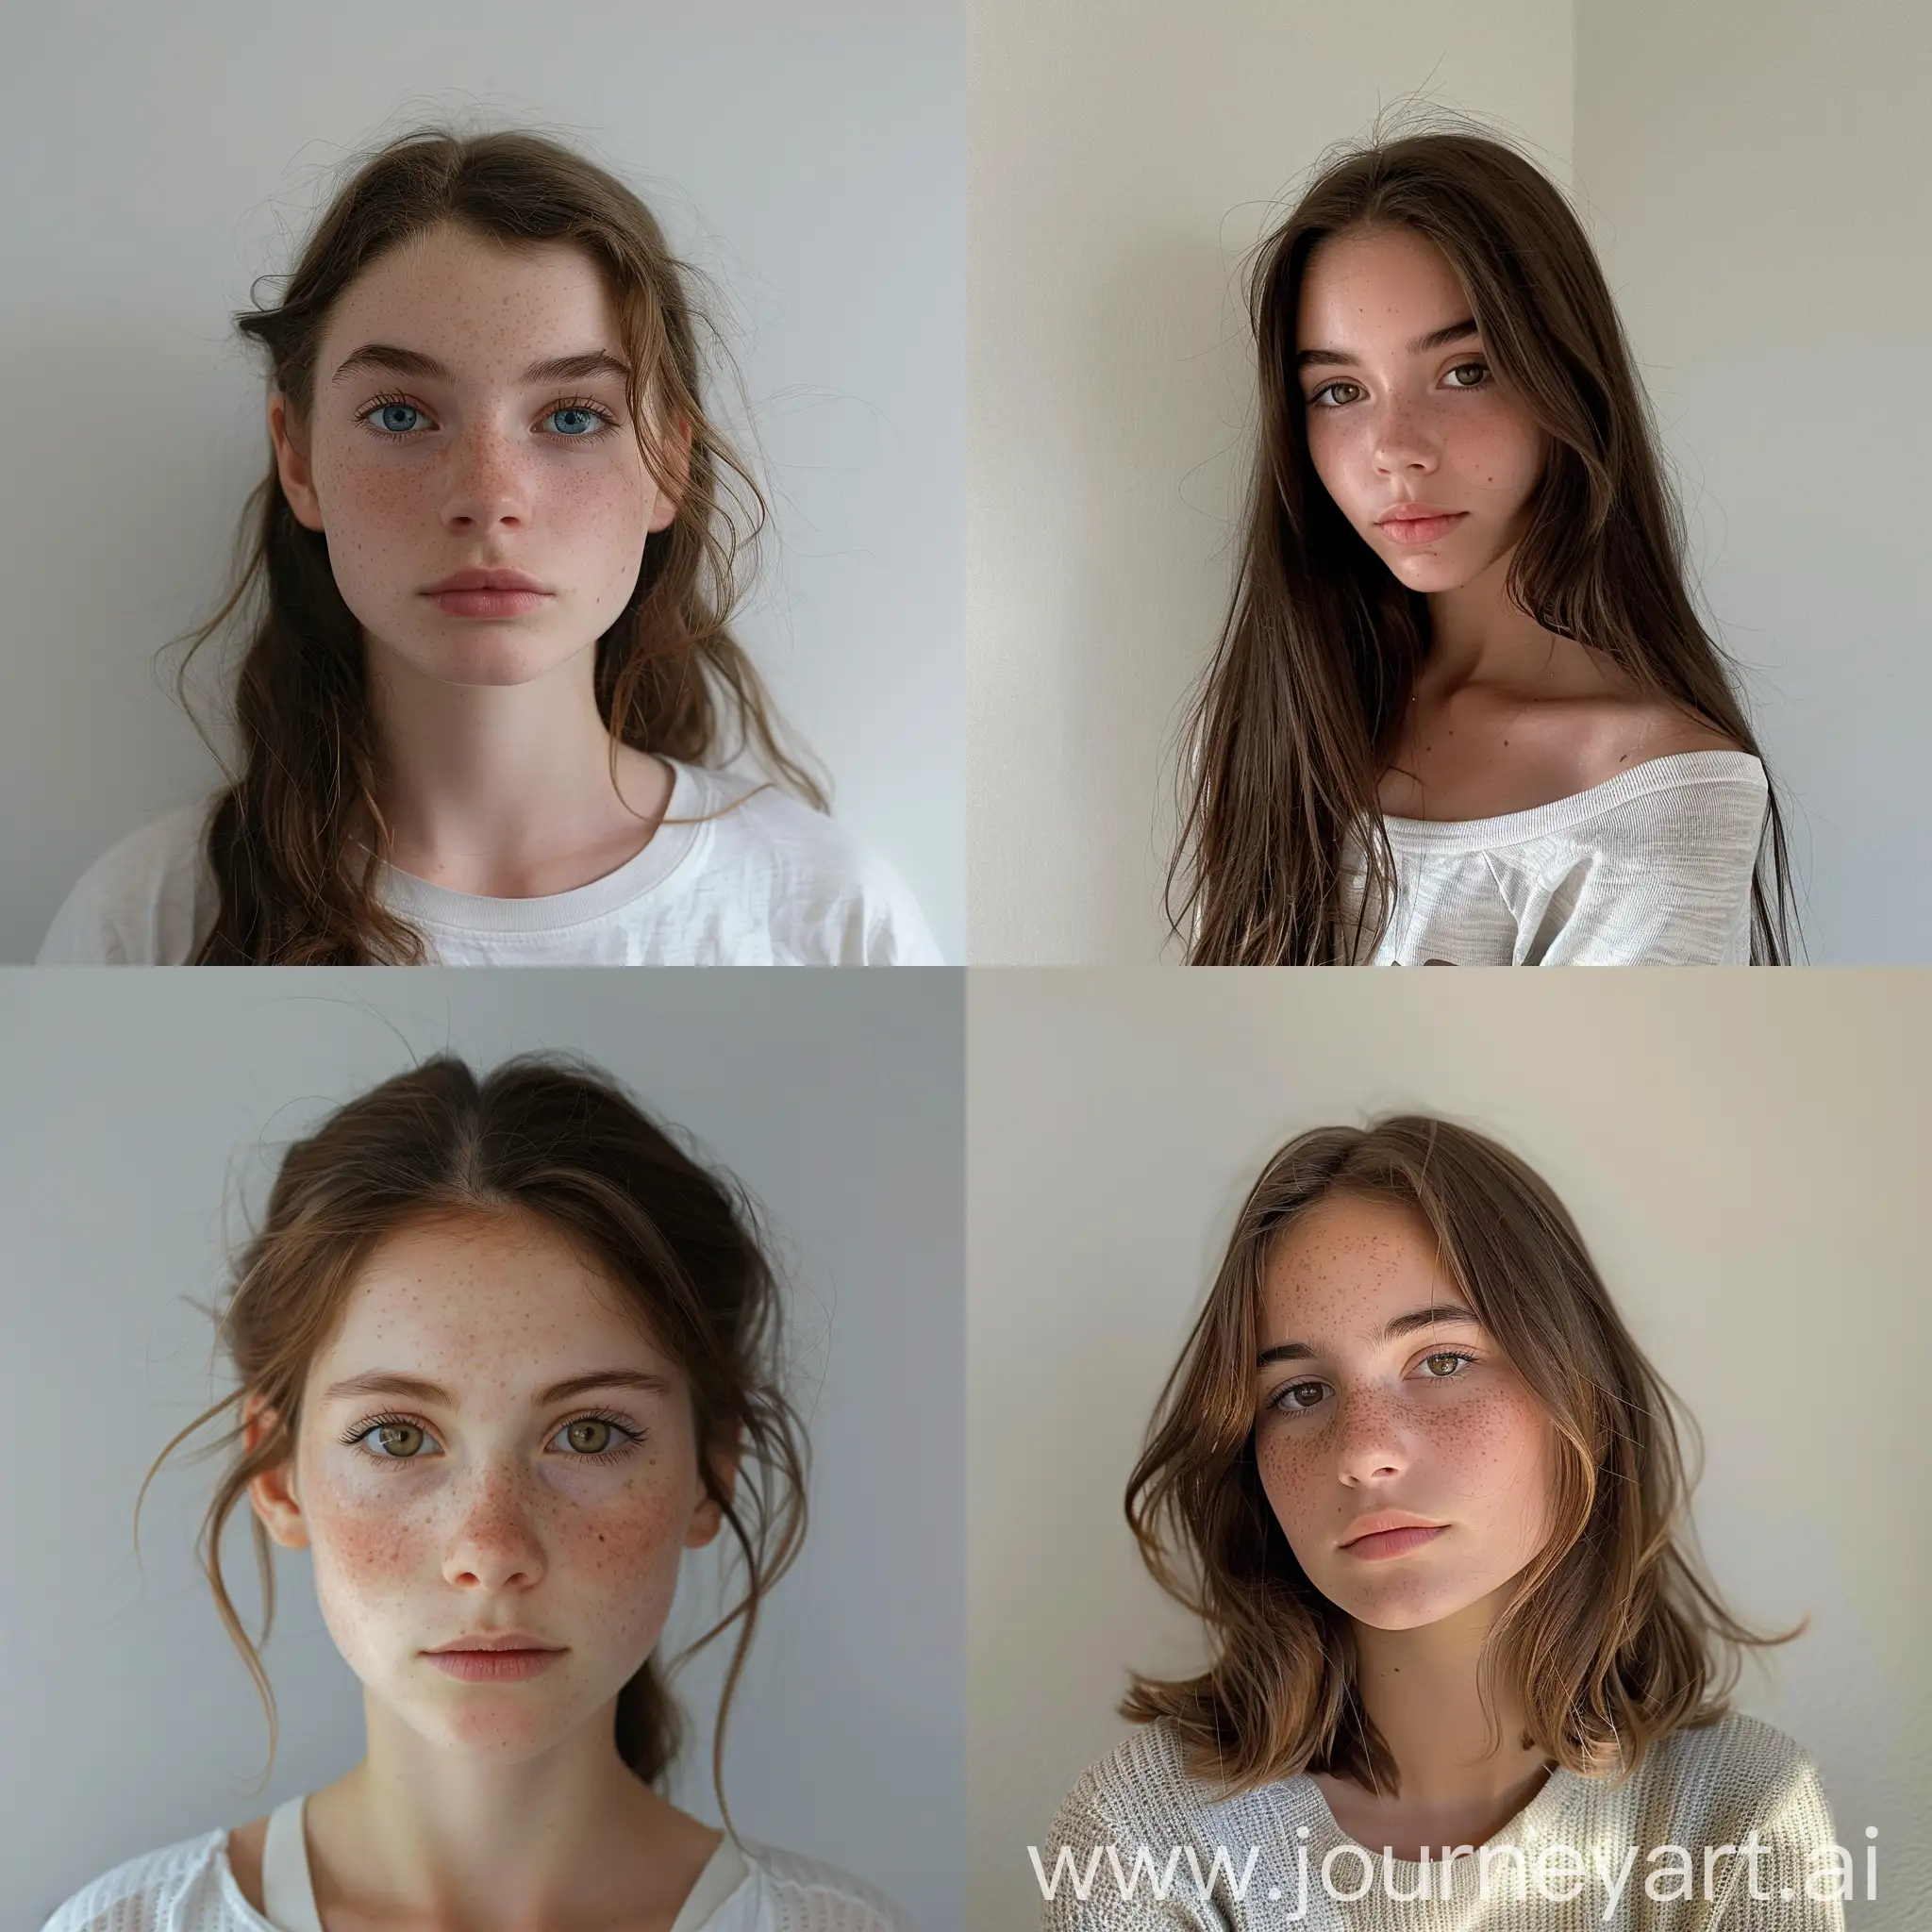 picture of a 19 year old girl, with a white background, shot inside, looks as real as it gets, no visible deformation, she doesn't look unrealistic, she doesn't look like a model, she is just an average girl, boring picture